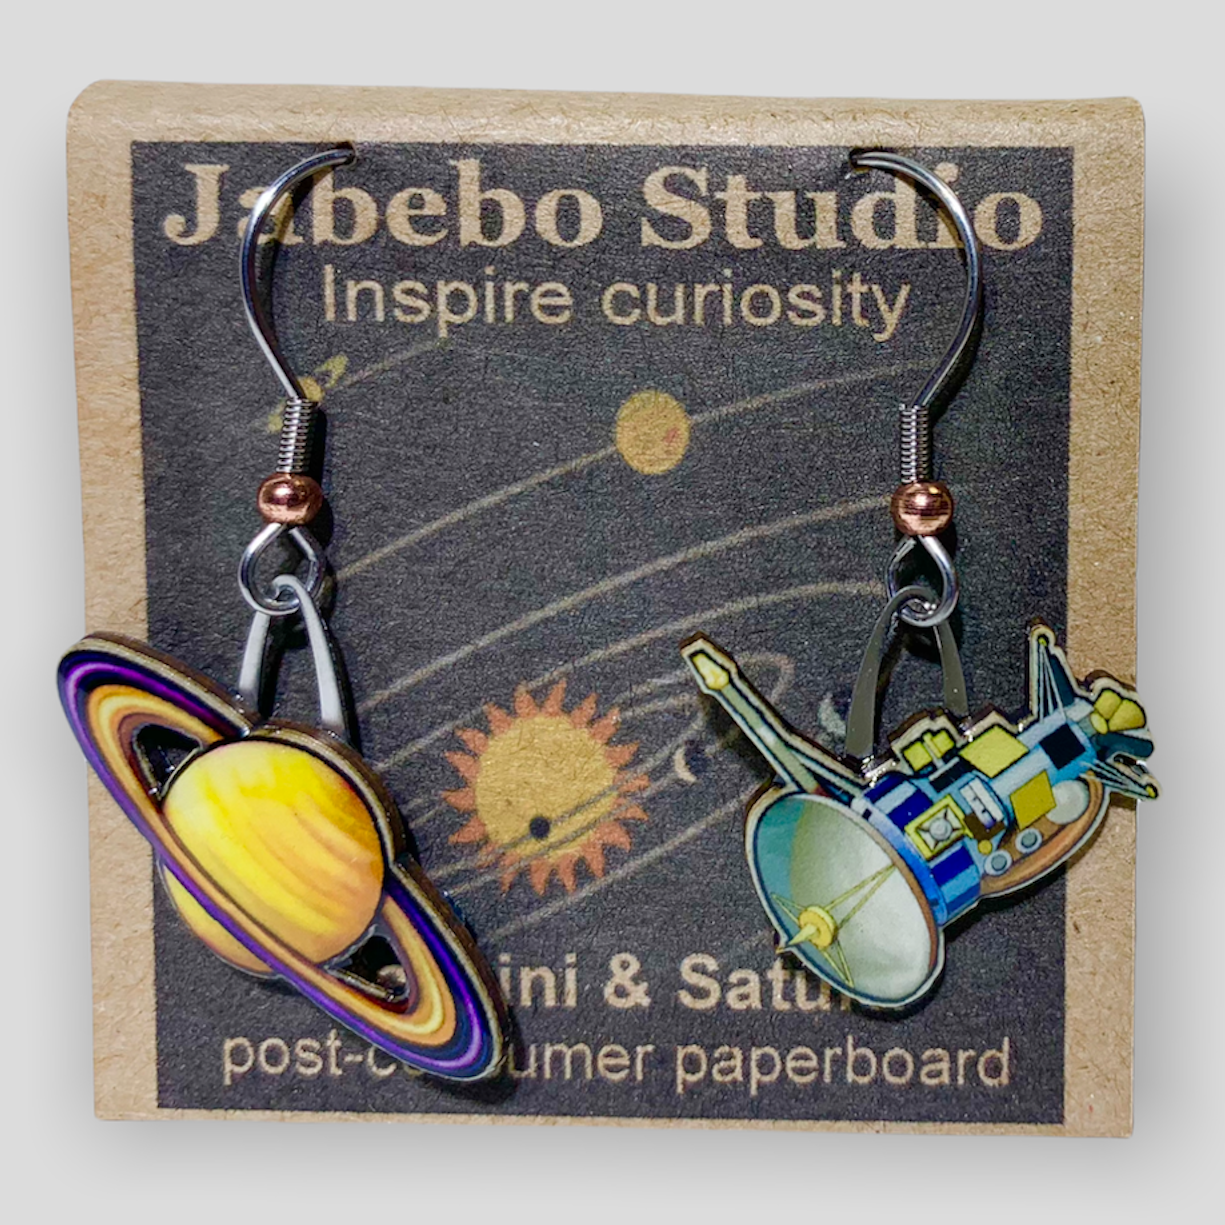 Picture shown is of 1 inch tall pair of earrings of Cassini & Saturn.